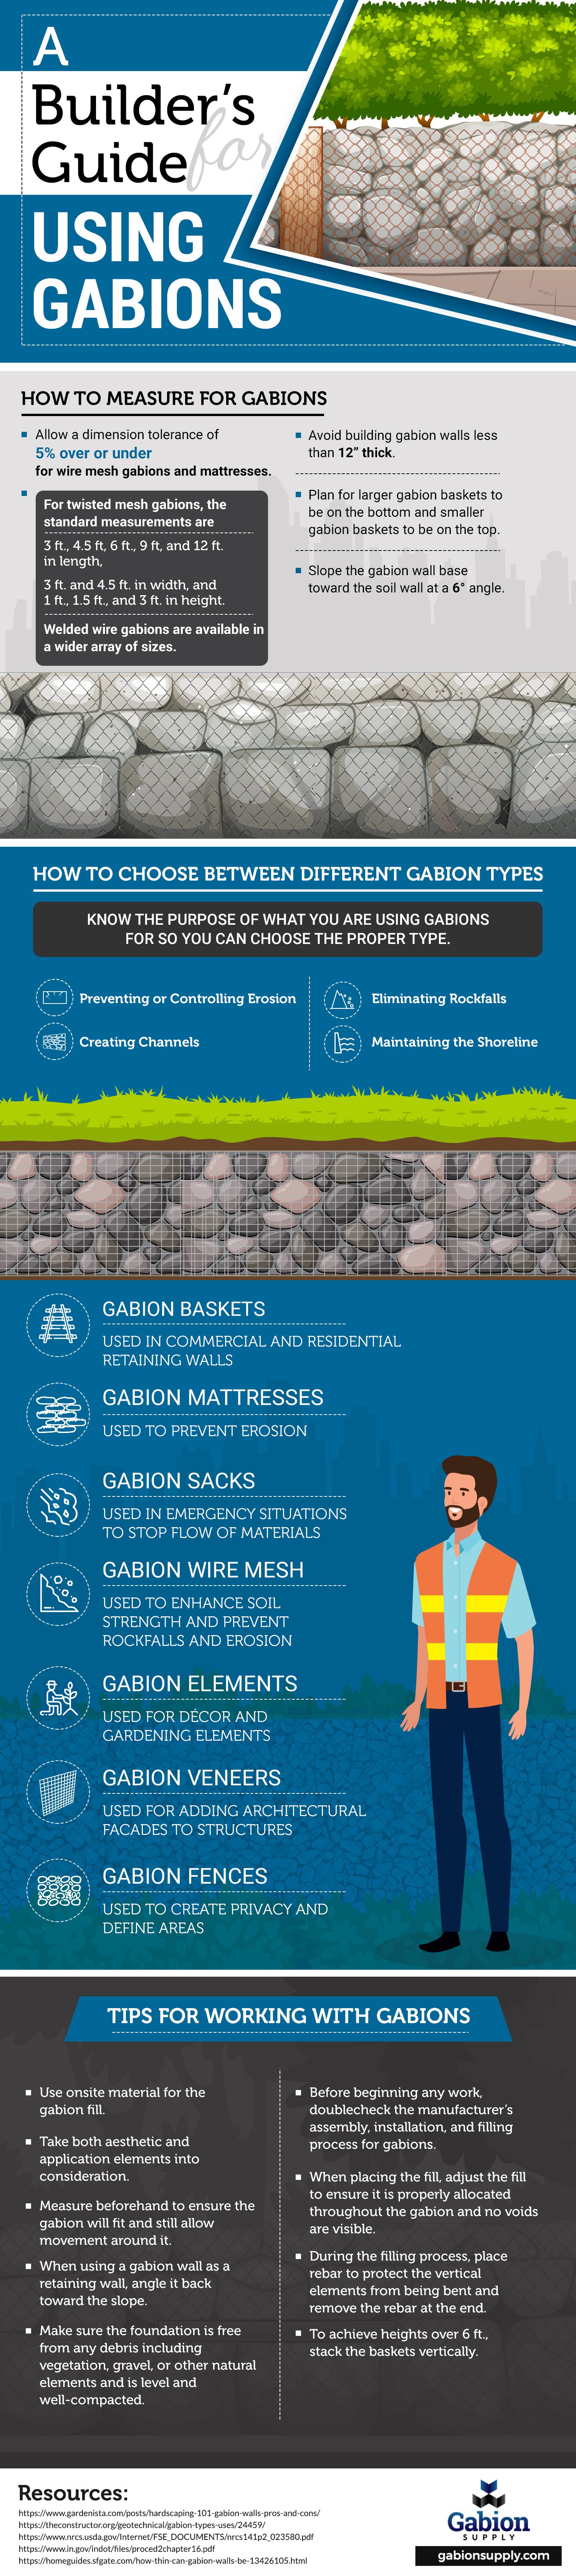 A Builder’s Guide for Using Gabions